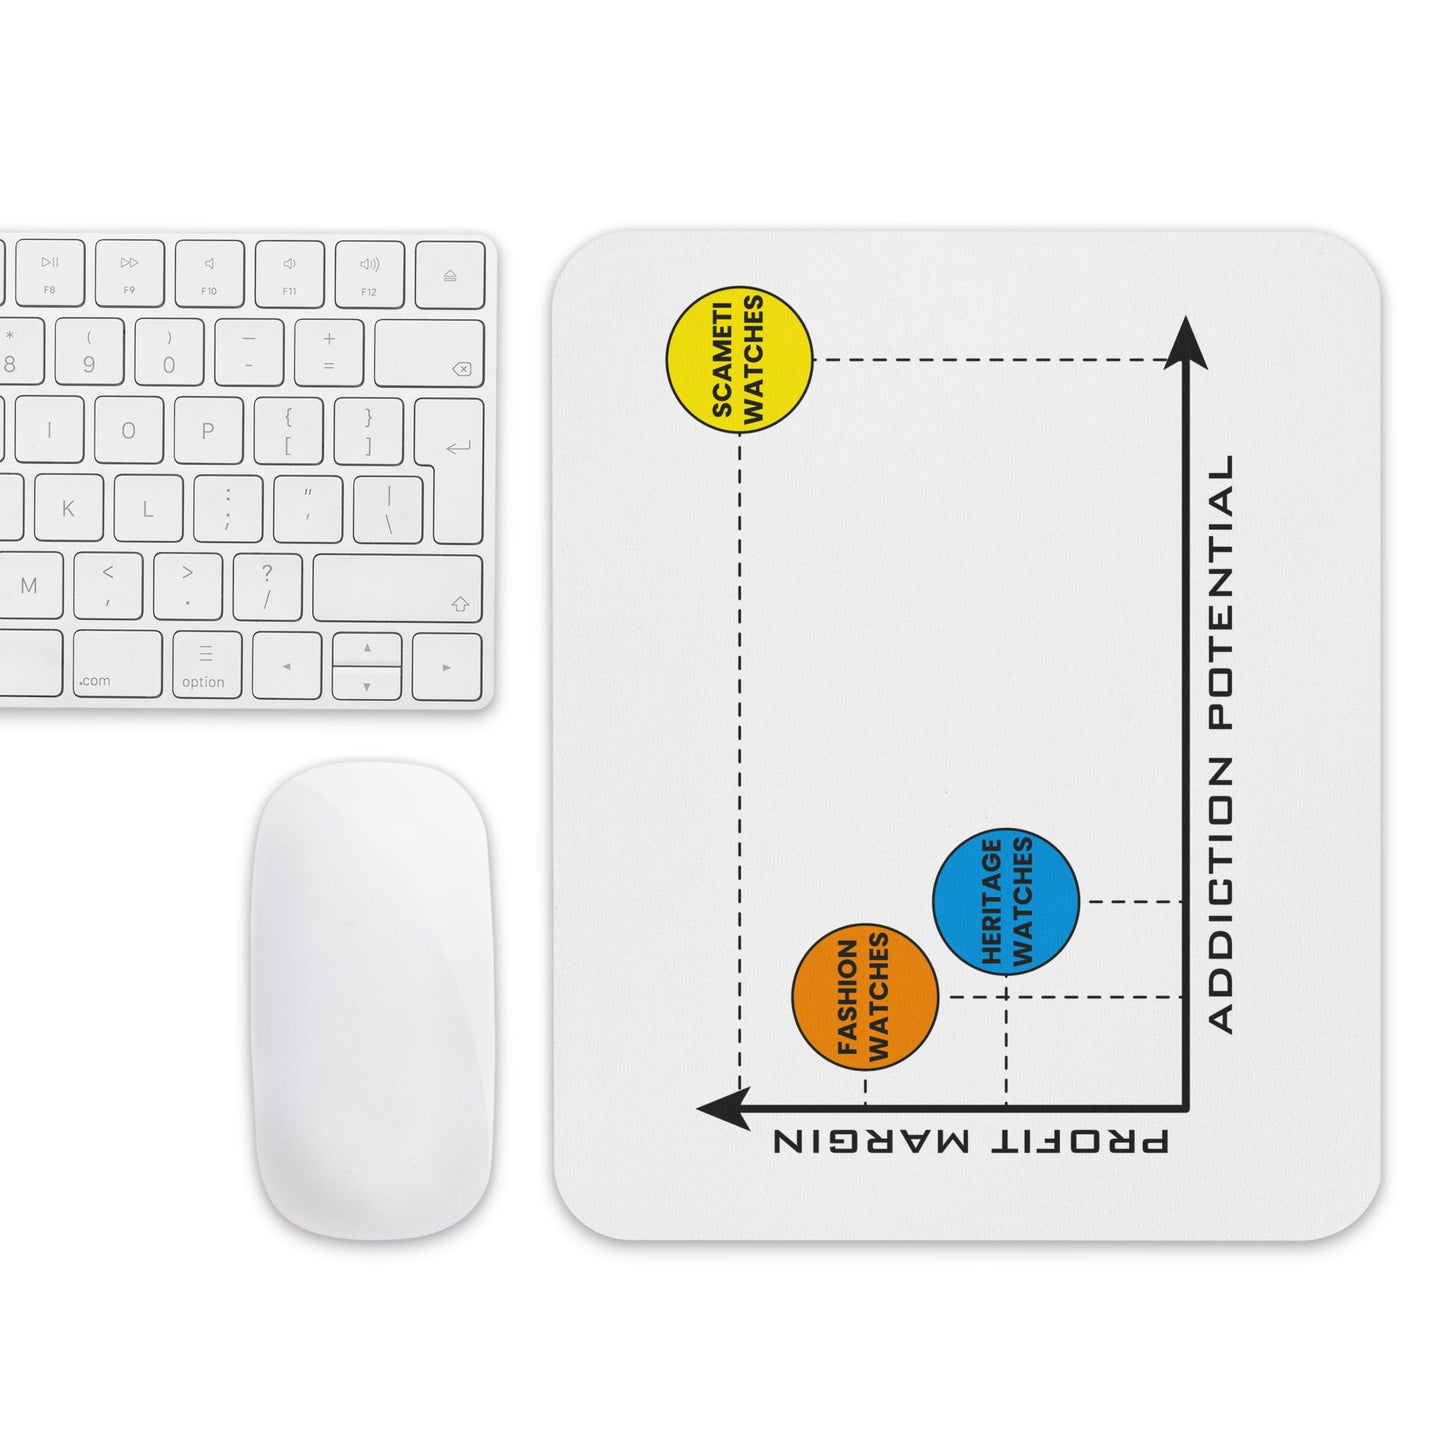 Scameti Watches Superiority Infographic Mousepad